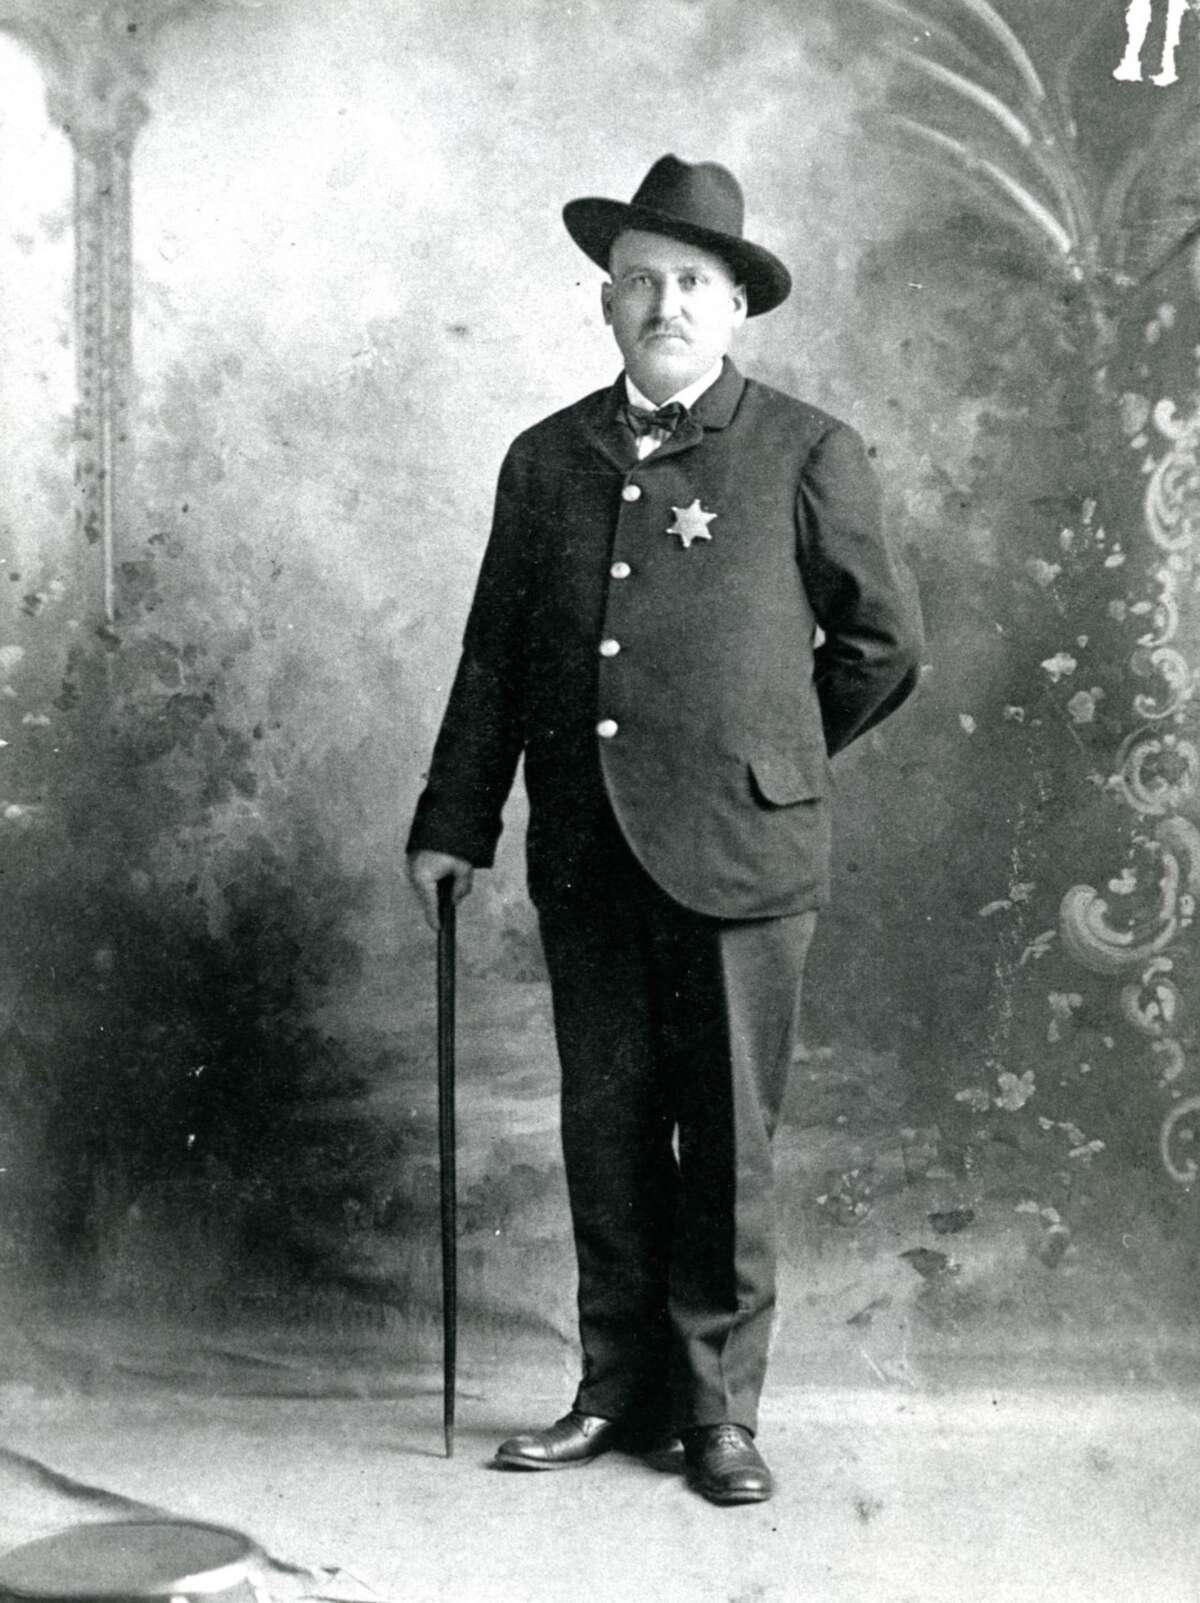 Lewis Weiler was Glen Carbon’s first Village Marshall. In 1905, the Village purchased Weiler’s Marshall’s Star for new incoming Marshall, Louis Soma.